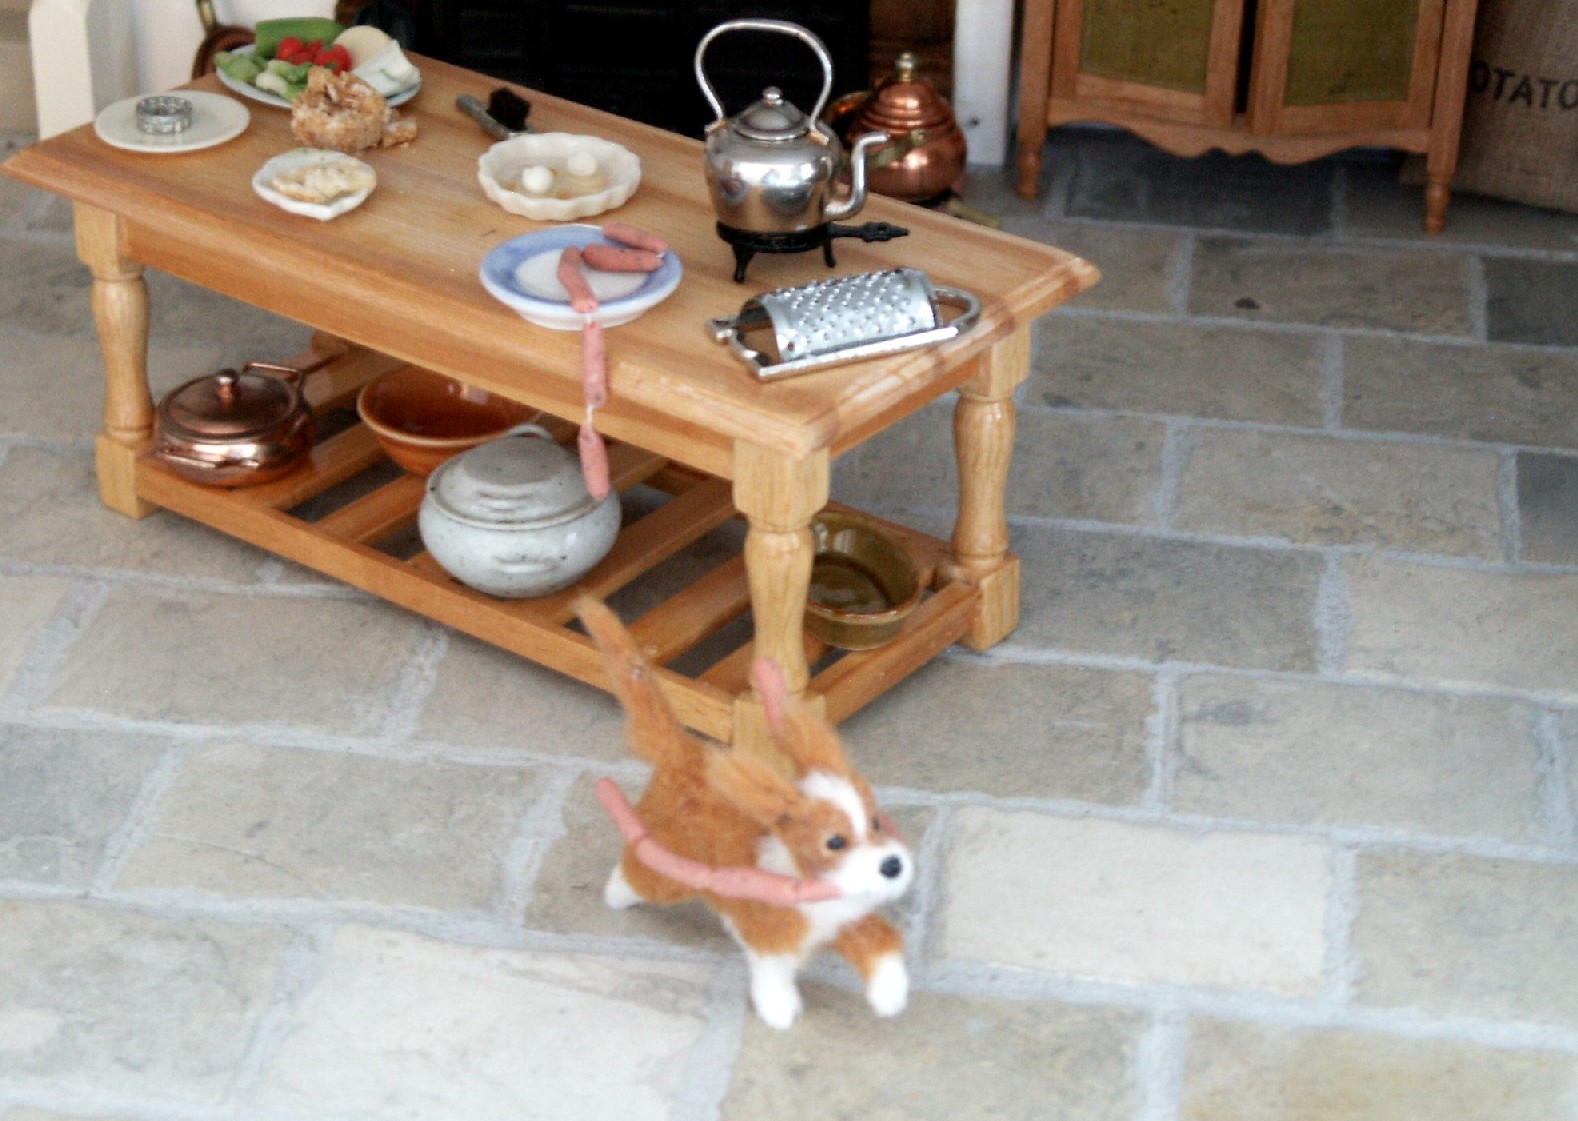 Dolls house dog with sausages